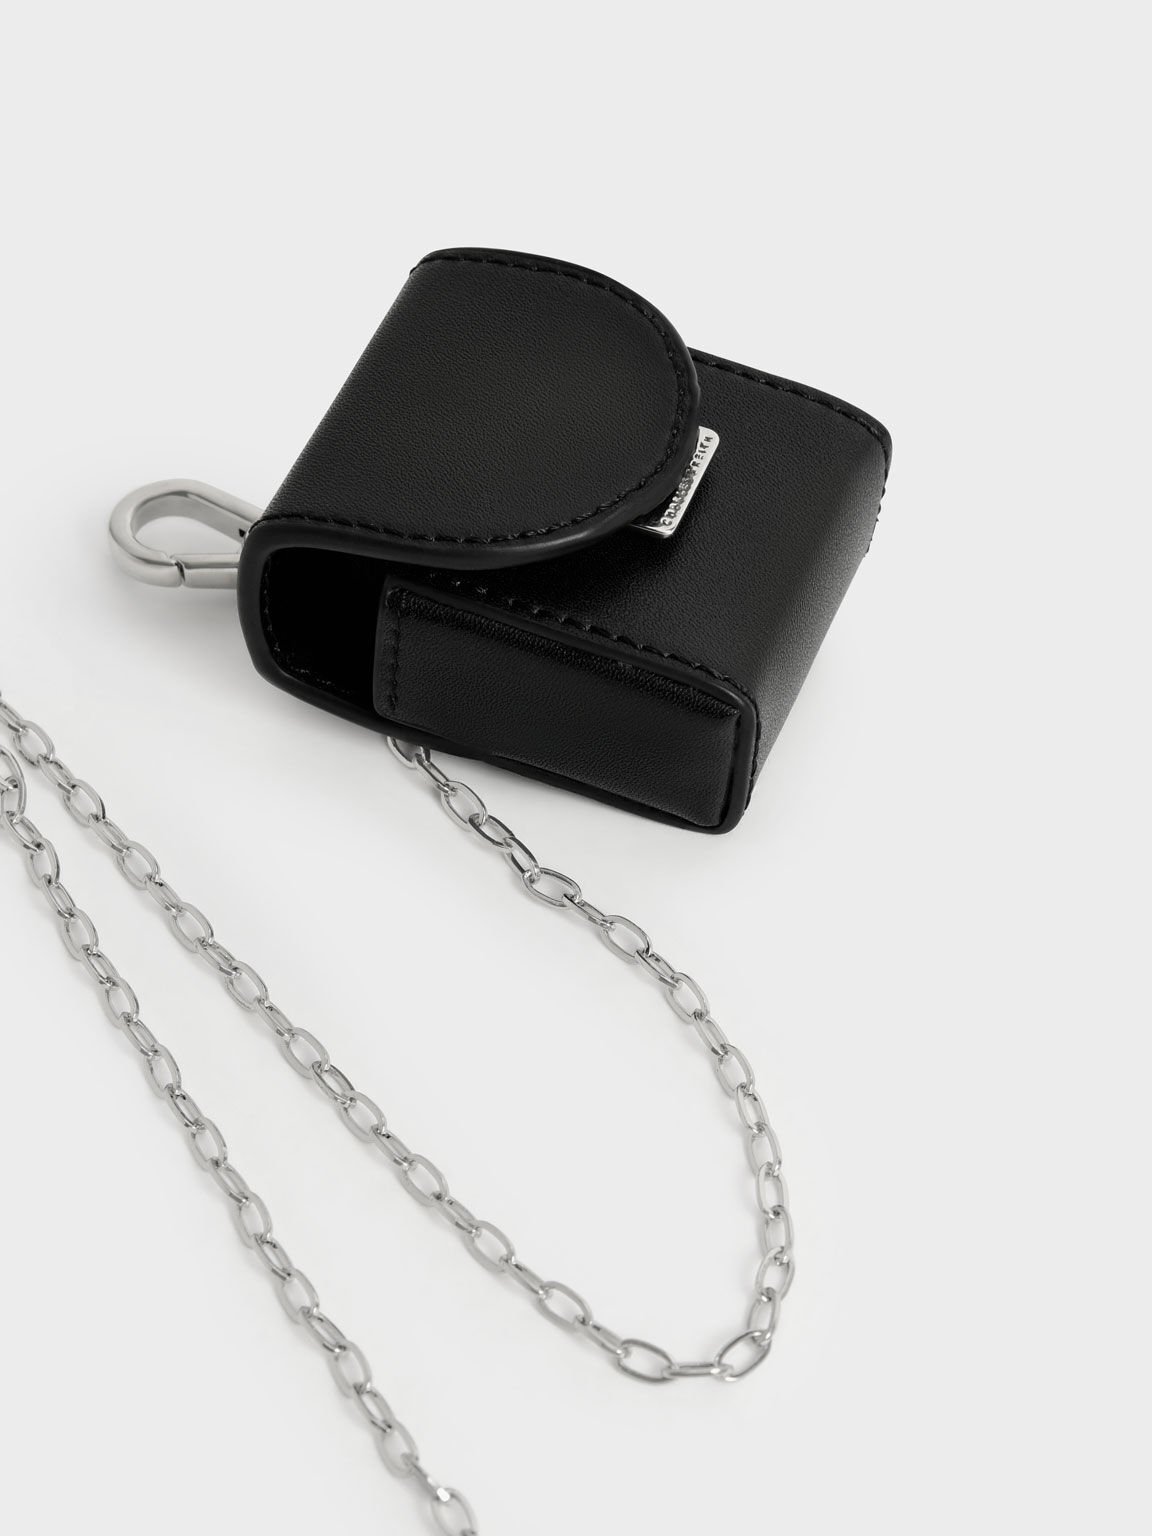 AirPods Pouch, Black, hi-res